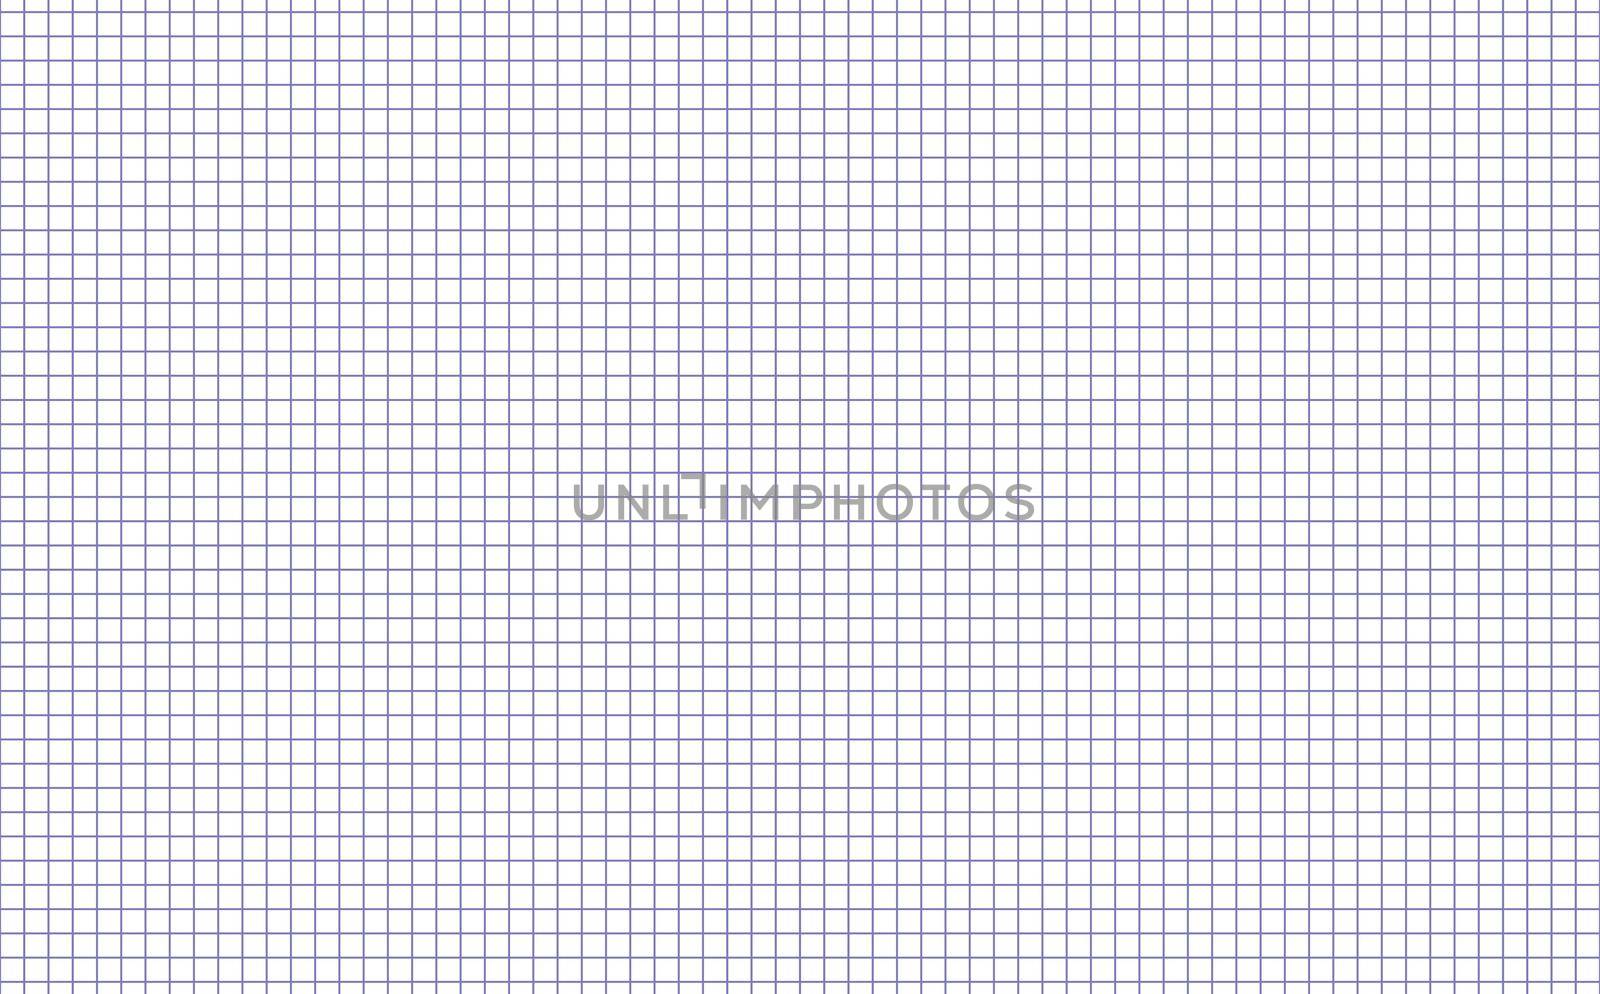 Graph paper. Printable squared grid paper with color horizontal lines. Geometric background for school, textures, notebook, diary. Realistic lined paper blank size reversal A5.